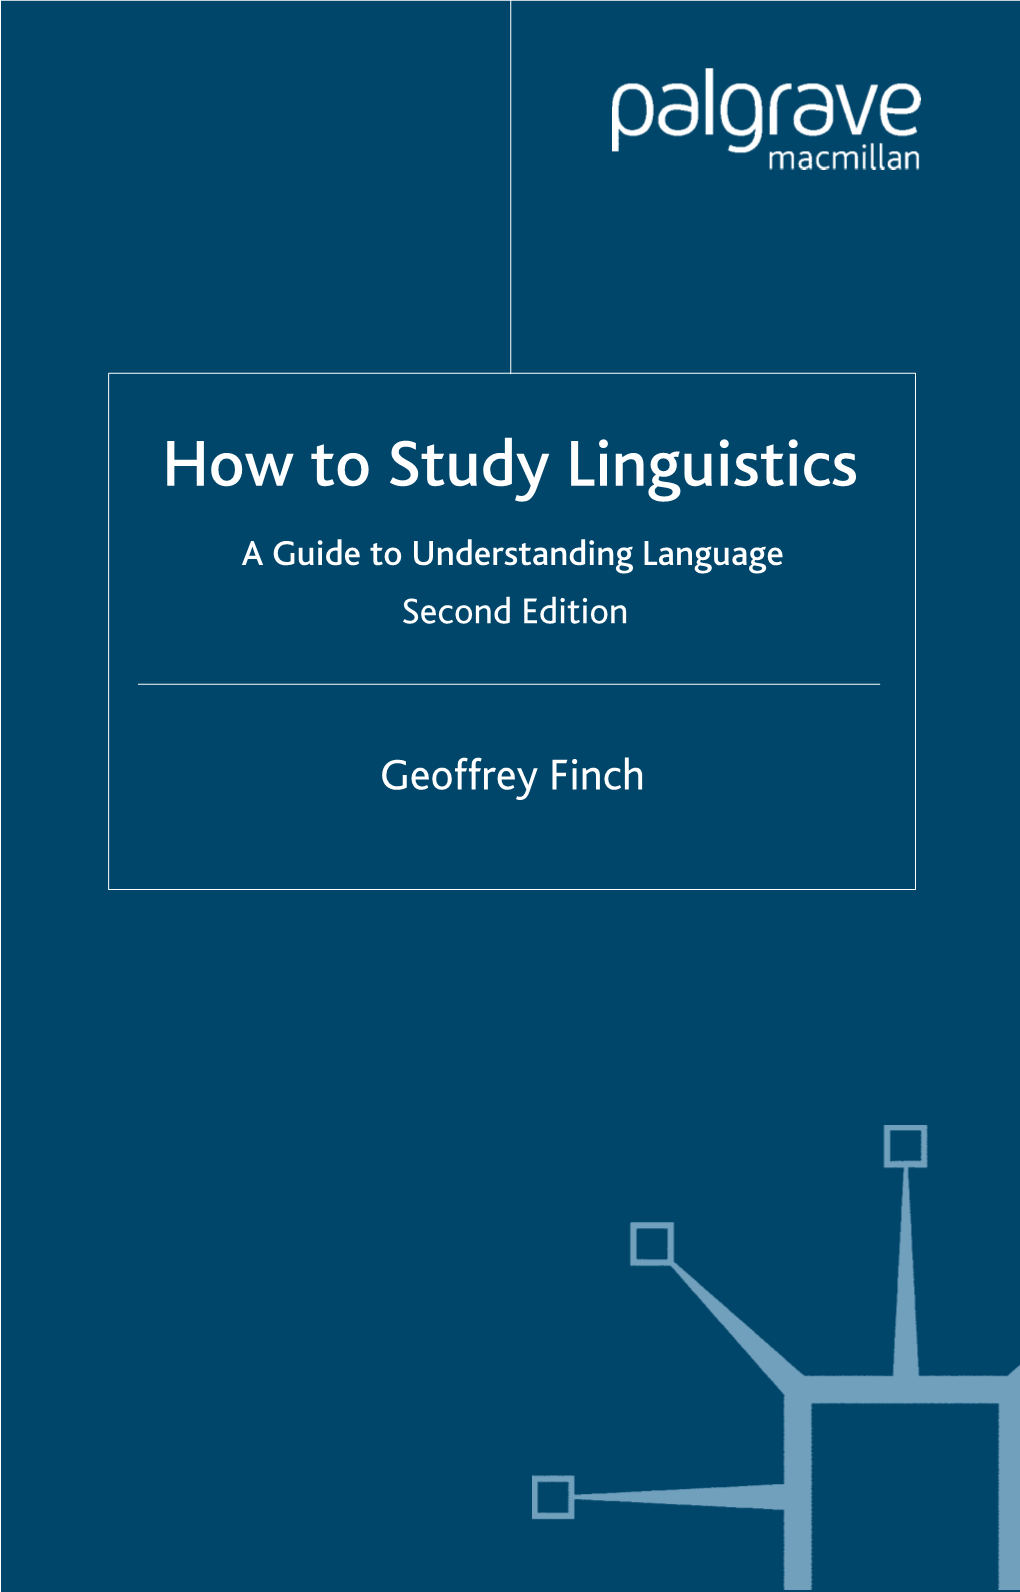 How to Study Linguistics: a Guide to Understanding Language